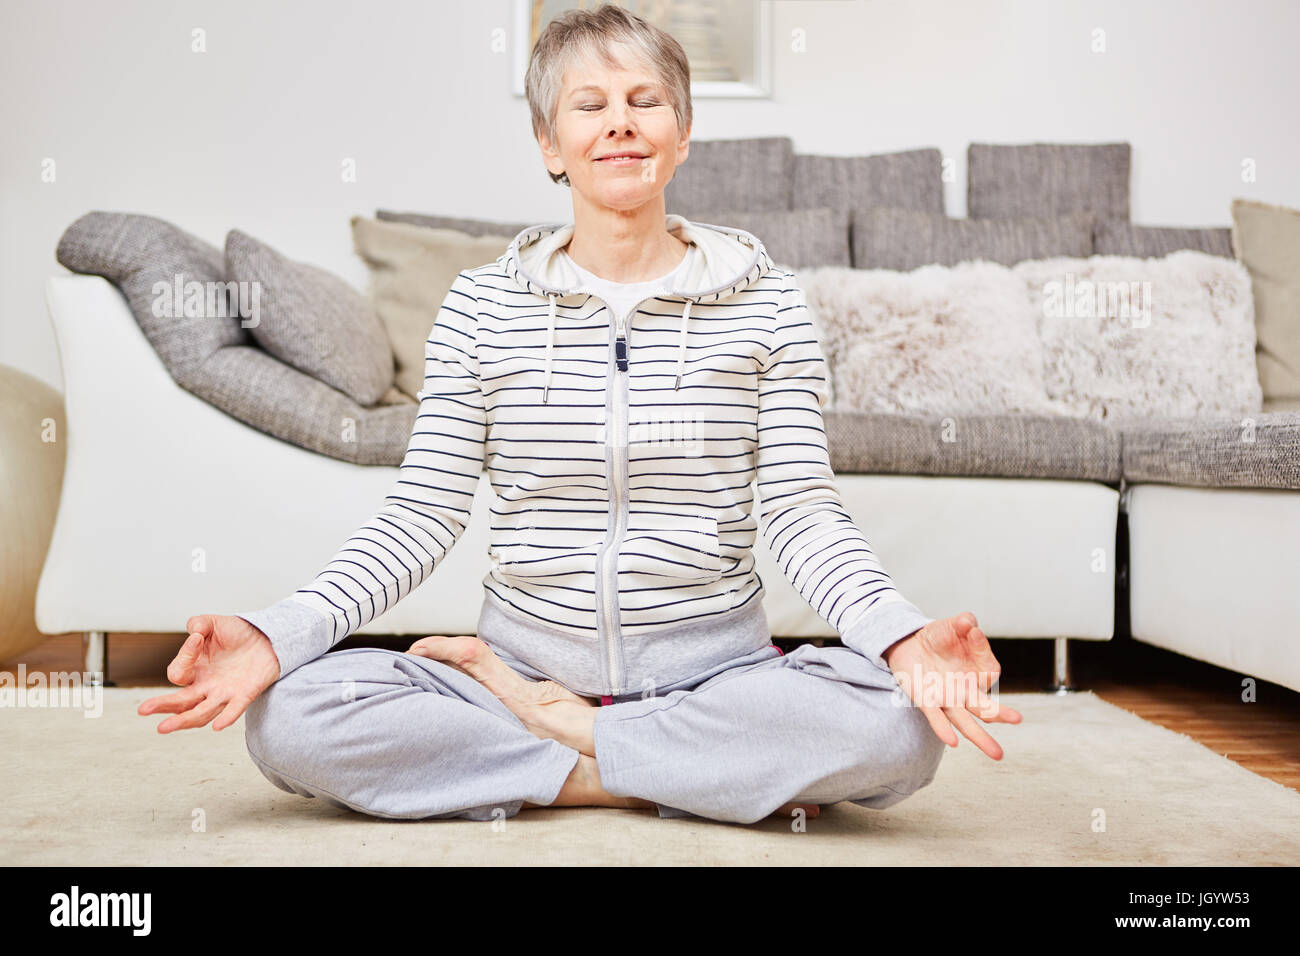 Senior woman in yoga lotus position for meditation and relaxation Stock Photo